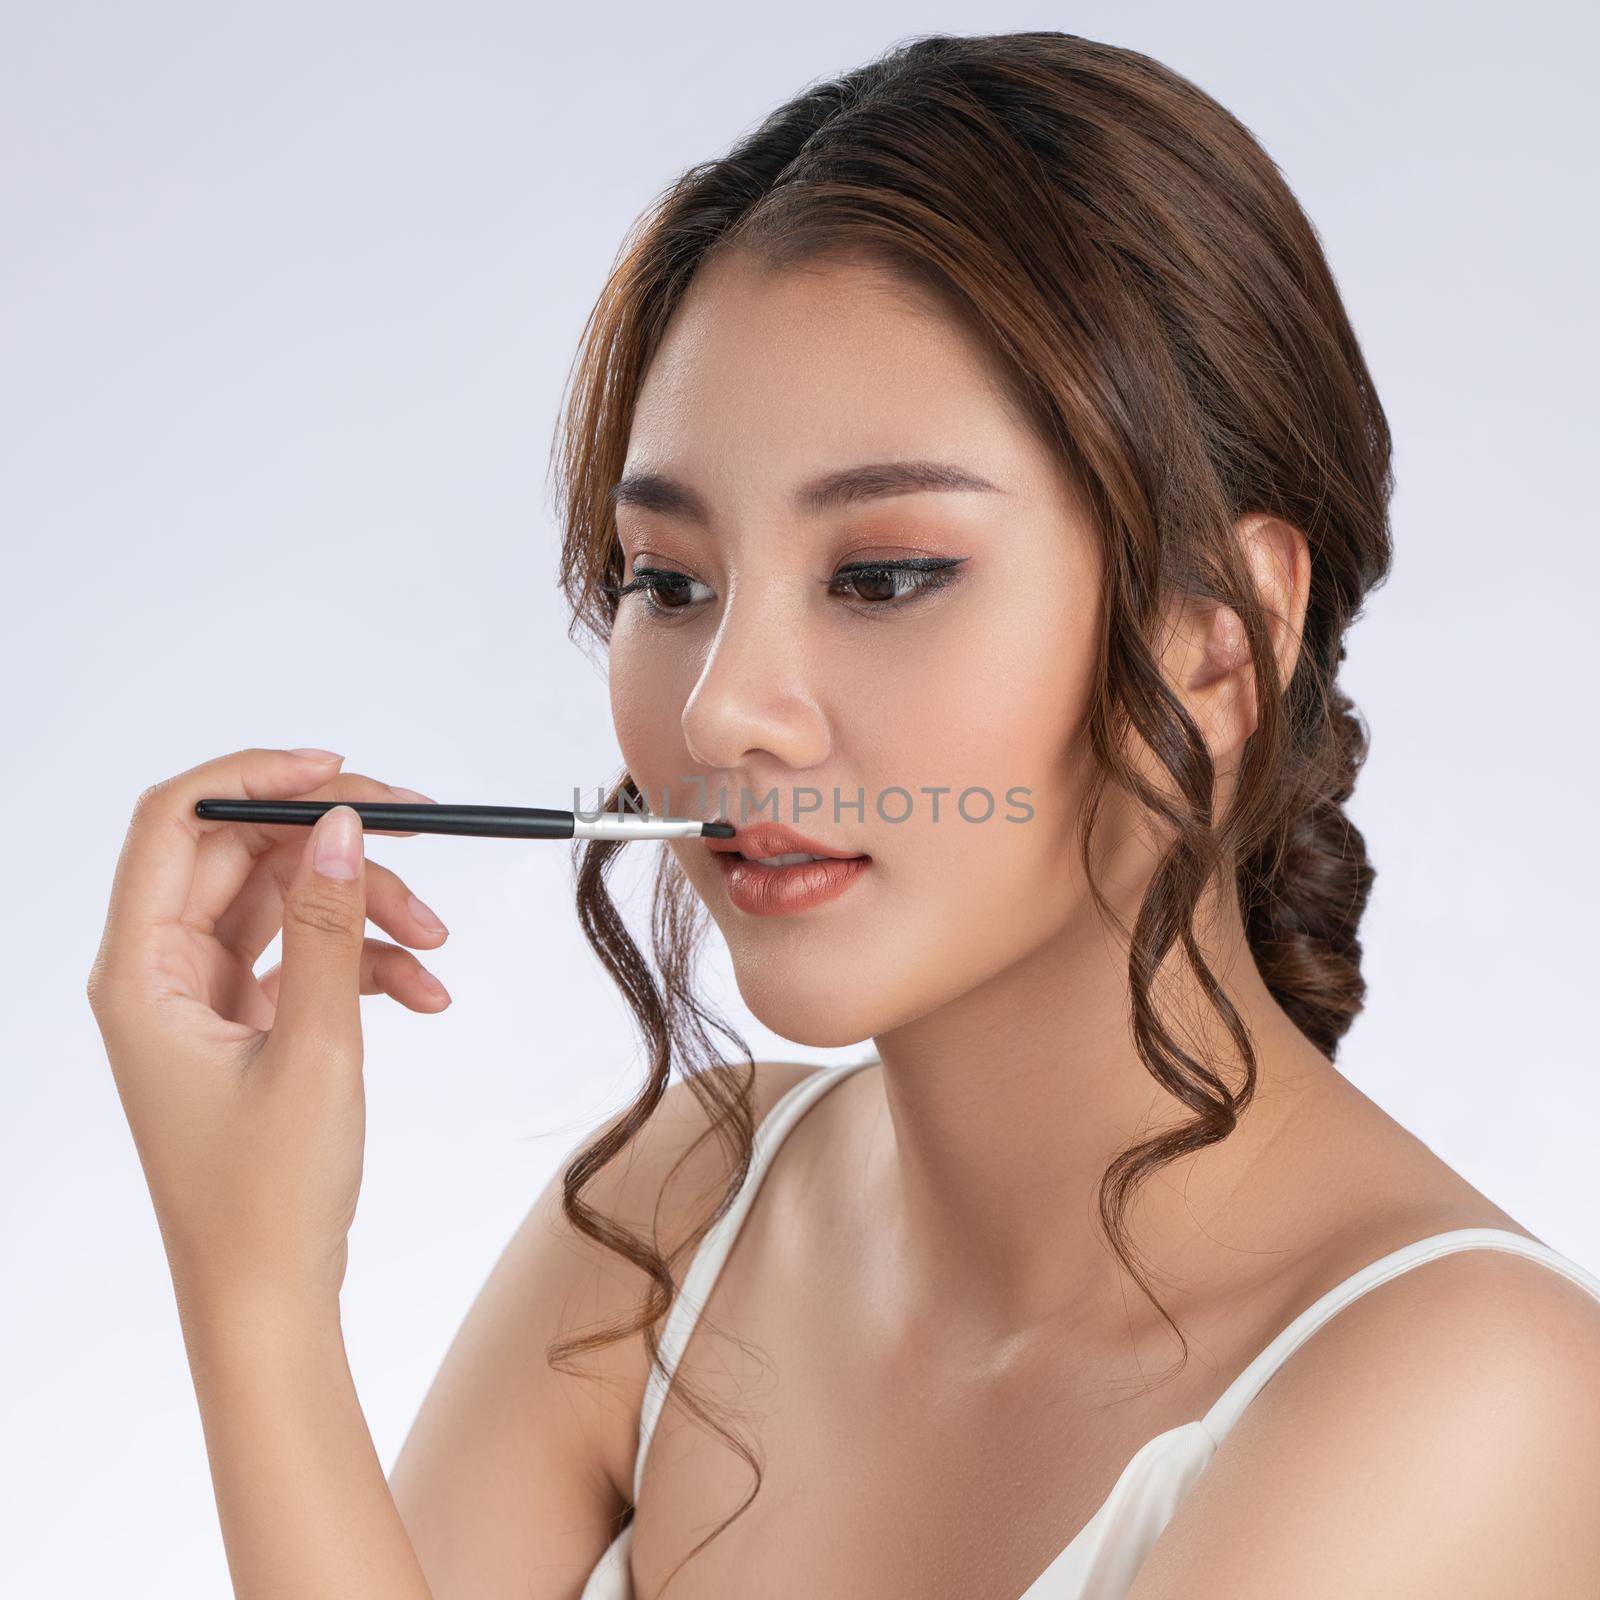 Closeup portrait of young gorgeous woman with healthy fair skin applying lipstick on her lip while looking at camera. Beauty concept with cosmetic and makeup.